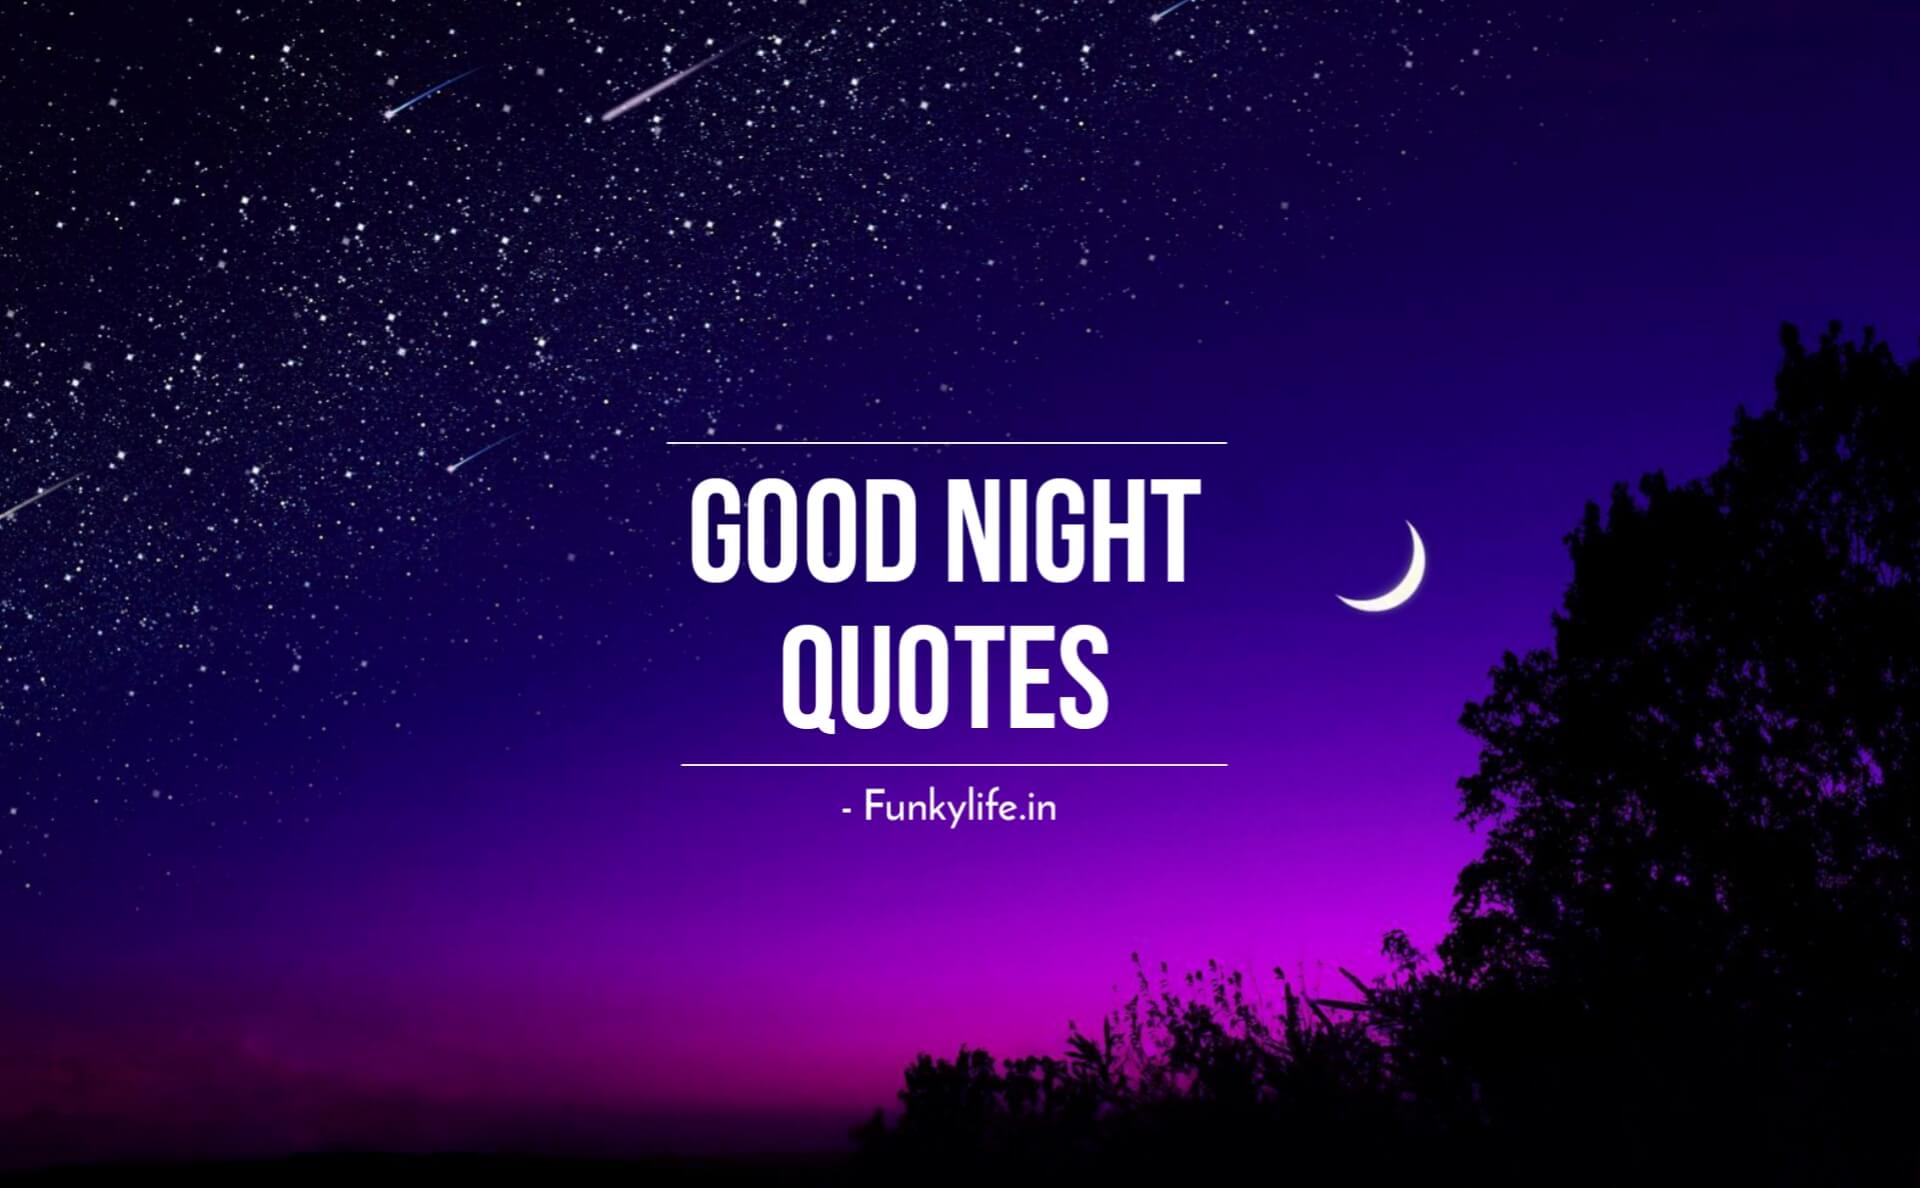 Gud nite quotes for her